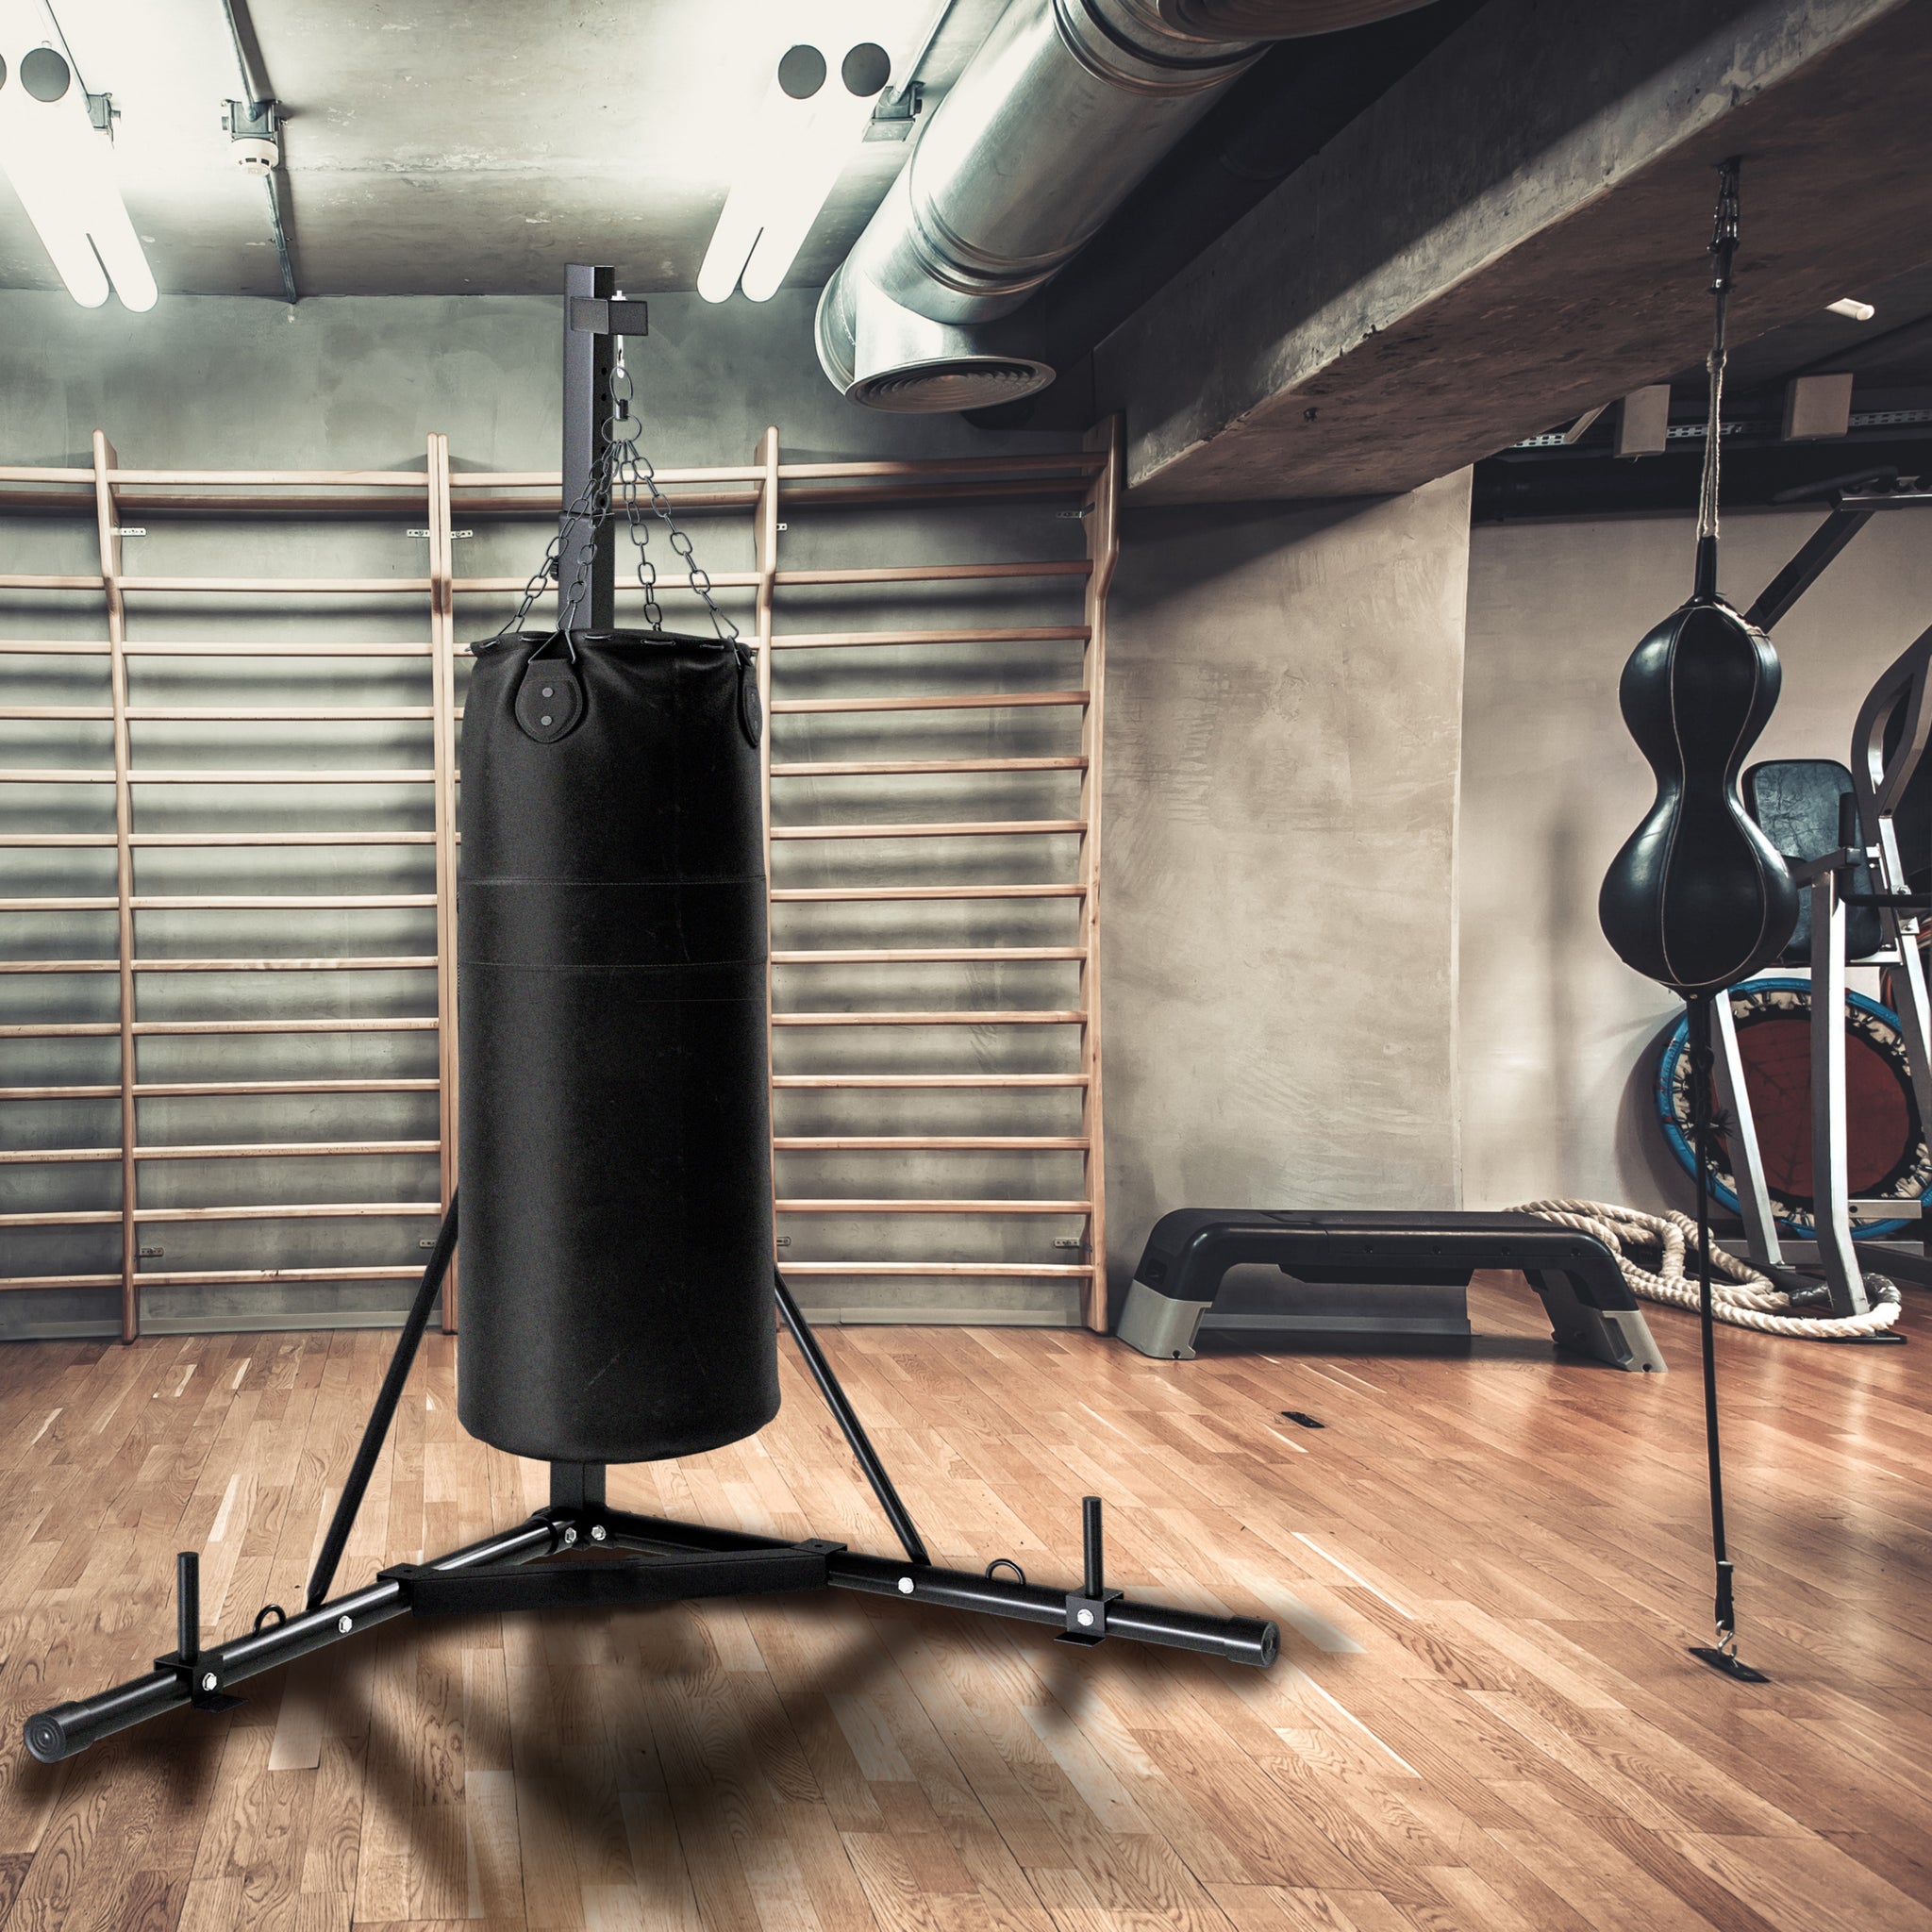 Senshi Japan XXL Heavy Punch Bag & Speed Ball Stand - Solid Steel Platform, Comes With Punch Bag & Leather Speed Ball